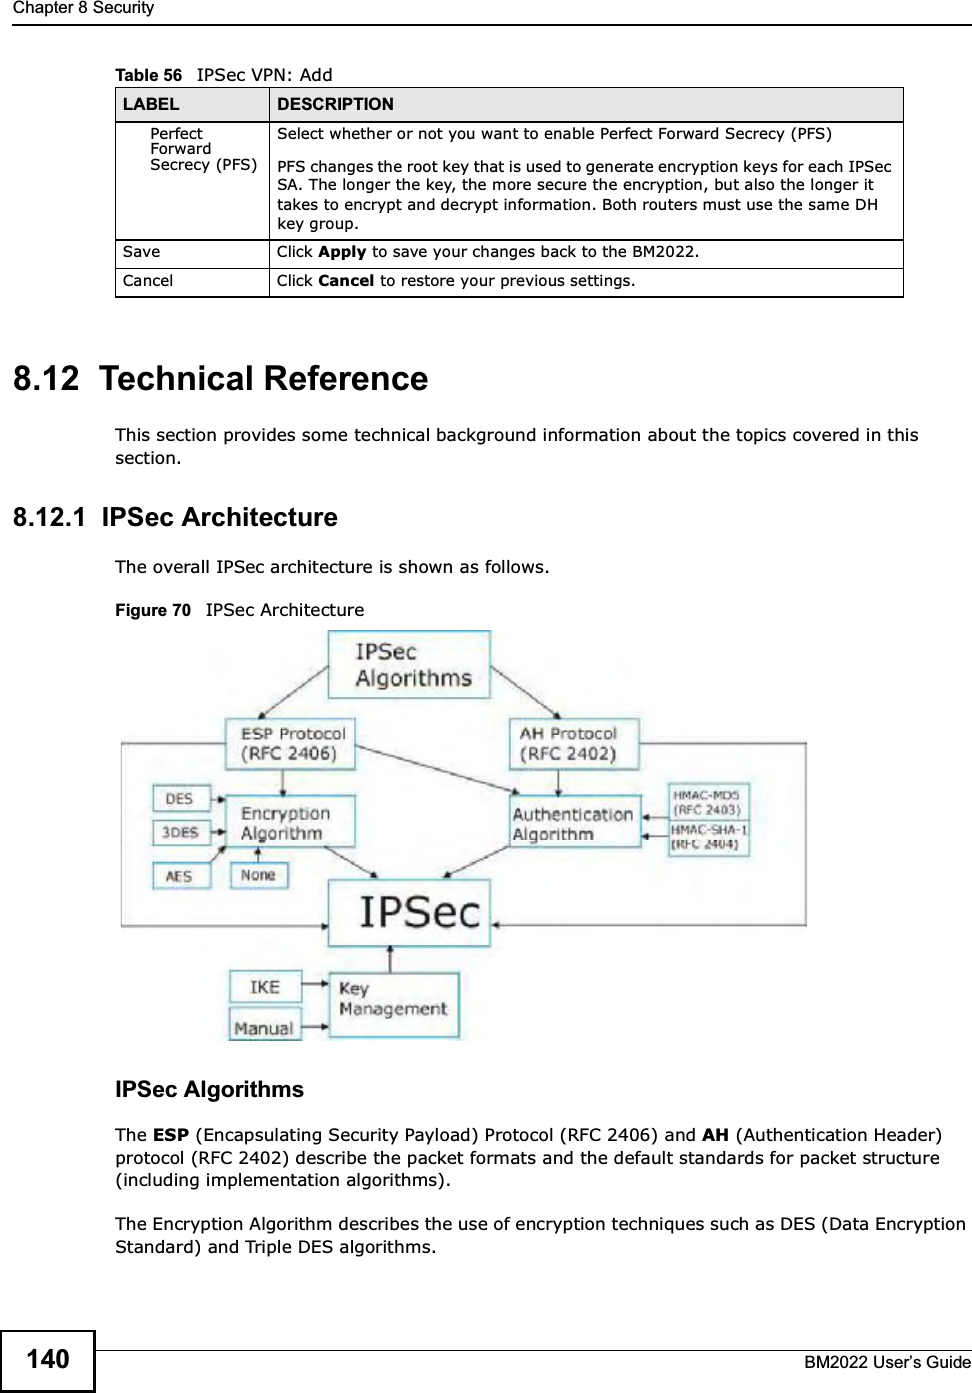 Chapter 8 SecurityBM2022 Users Guide1408.12  Technical ReferenceThis section provides some technical background information about the topics covered in this section.8.12.1  IPSec ArchitectureThe overall IPSec architecture is shown as follows.Figure 70   IPSec ArchitectureIPSec AlgorithmsThe ESP (Encapsulating Security Payload) Protocol (RFC 2406) and AH (Authentication Header) protocol (RFC 2402) describe the packet formats and the default standards for packet structure (including implementation algorithms).The Encryption Algorithm describes the use of encryption techniques such as DES (Data Encryption Standard) and Triple DES algorithms.Perfect Forward Secrecy (PFS)Select whether or not you want to enable Perfect Forward Secrecy (PFS)PFS changes the root key that is used to generate encryption keys for each IPSec SA. The longer the key, the more secure the encryption, but also the longer it takes to encrypt and decrypt information. Both routers must use the same DH key group.Save Click Apply to save your changes back to the BM2022.Cancel Click Cancel to restore your previous settings.Table 56   IPSec VPN: AddLABEL DESCRIPTION